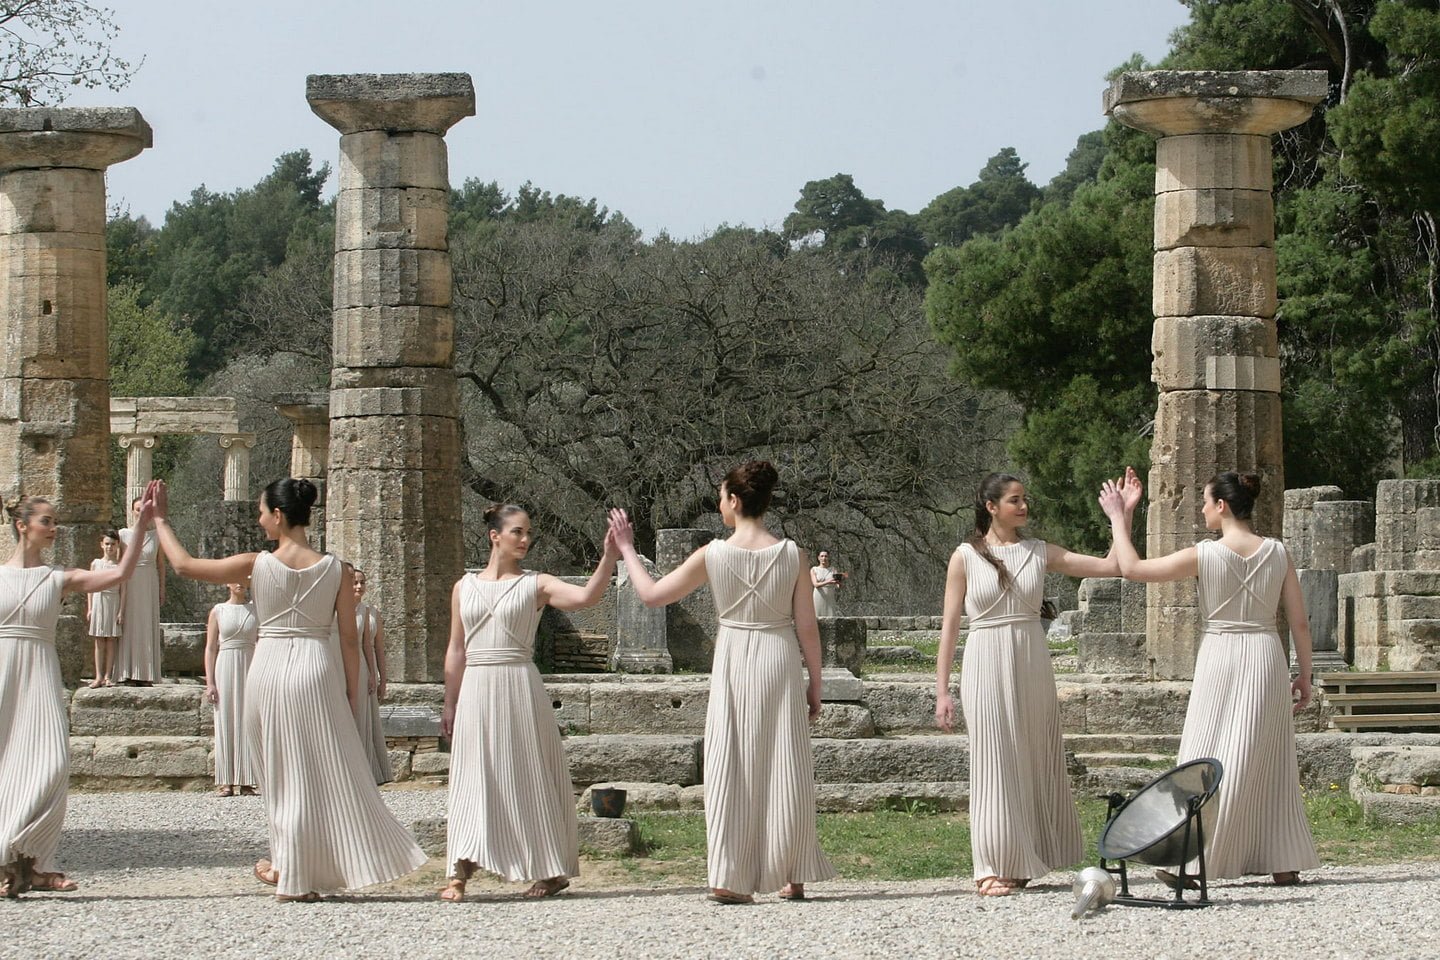 Lighting Ceremony of the Olympic Flame at Ancient Olympia, Greece